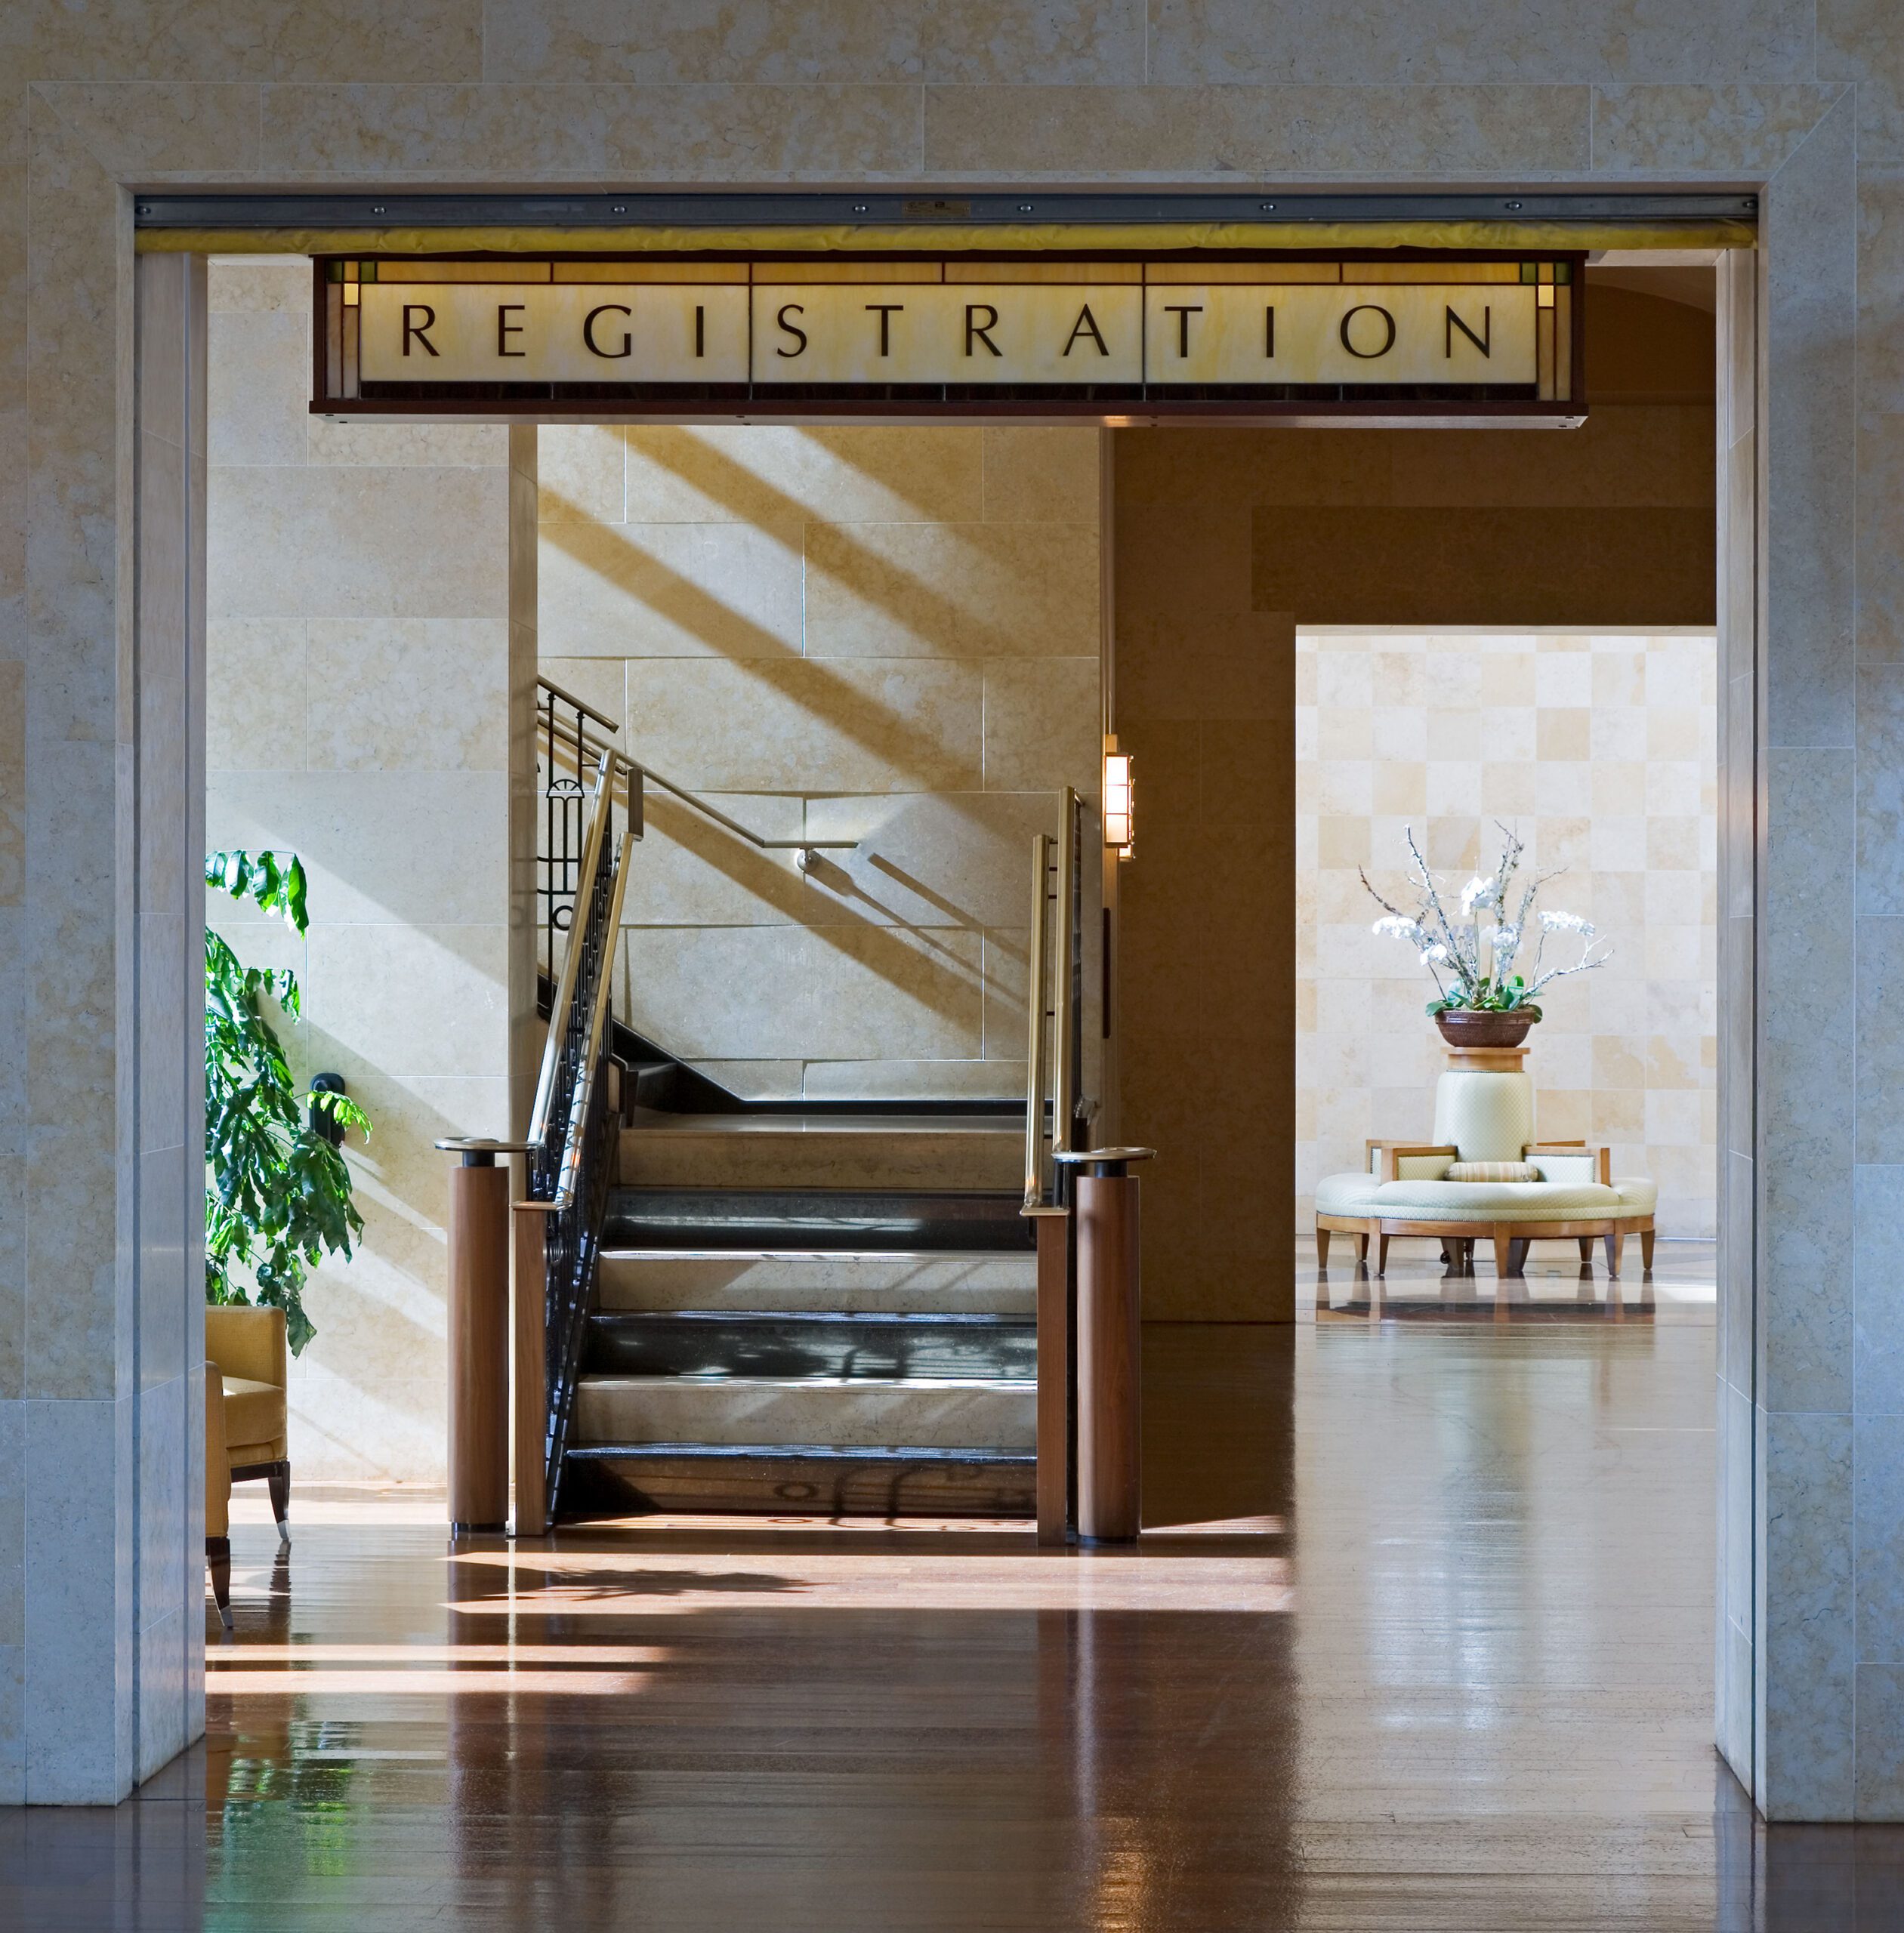 st julien hotel registration sign with stairs